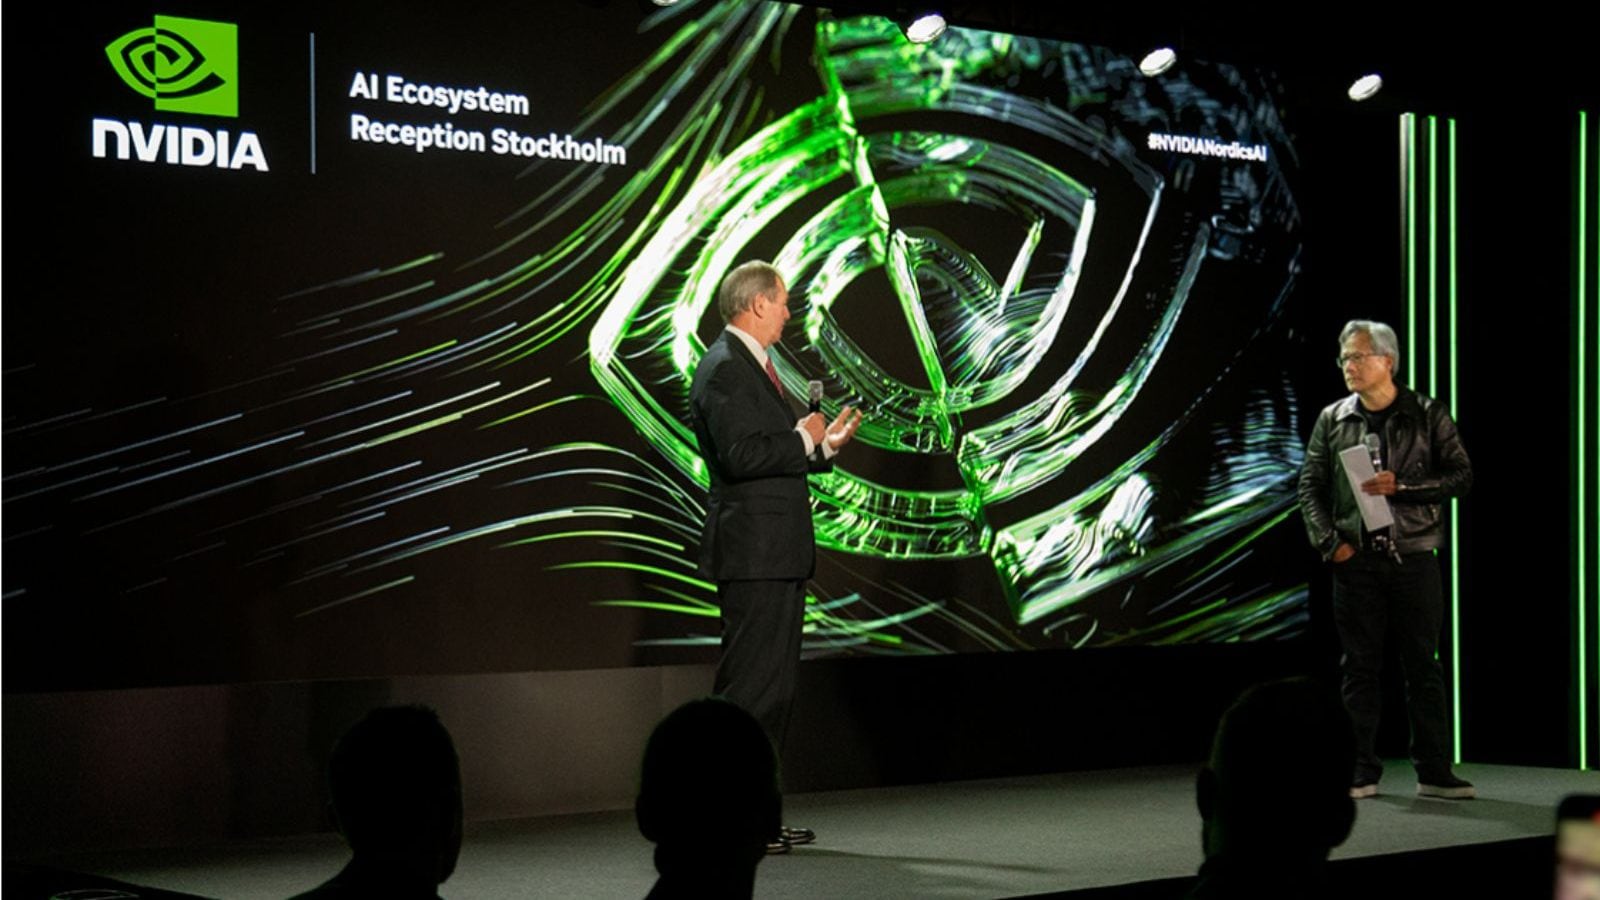 Nvidia CEO Jensen Huang Says AI Will Need Regulation, Social Norms